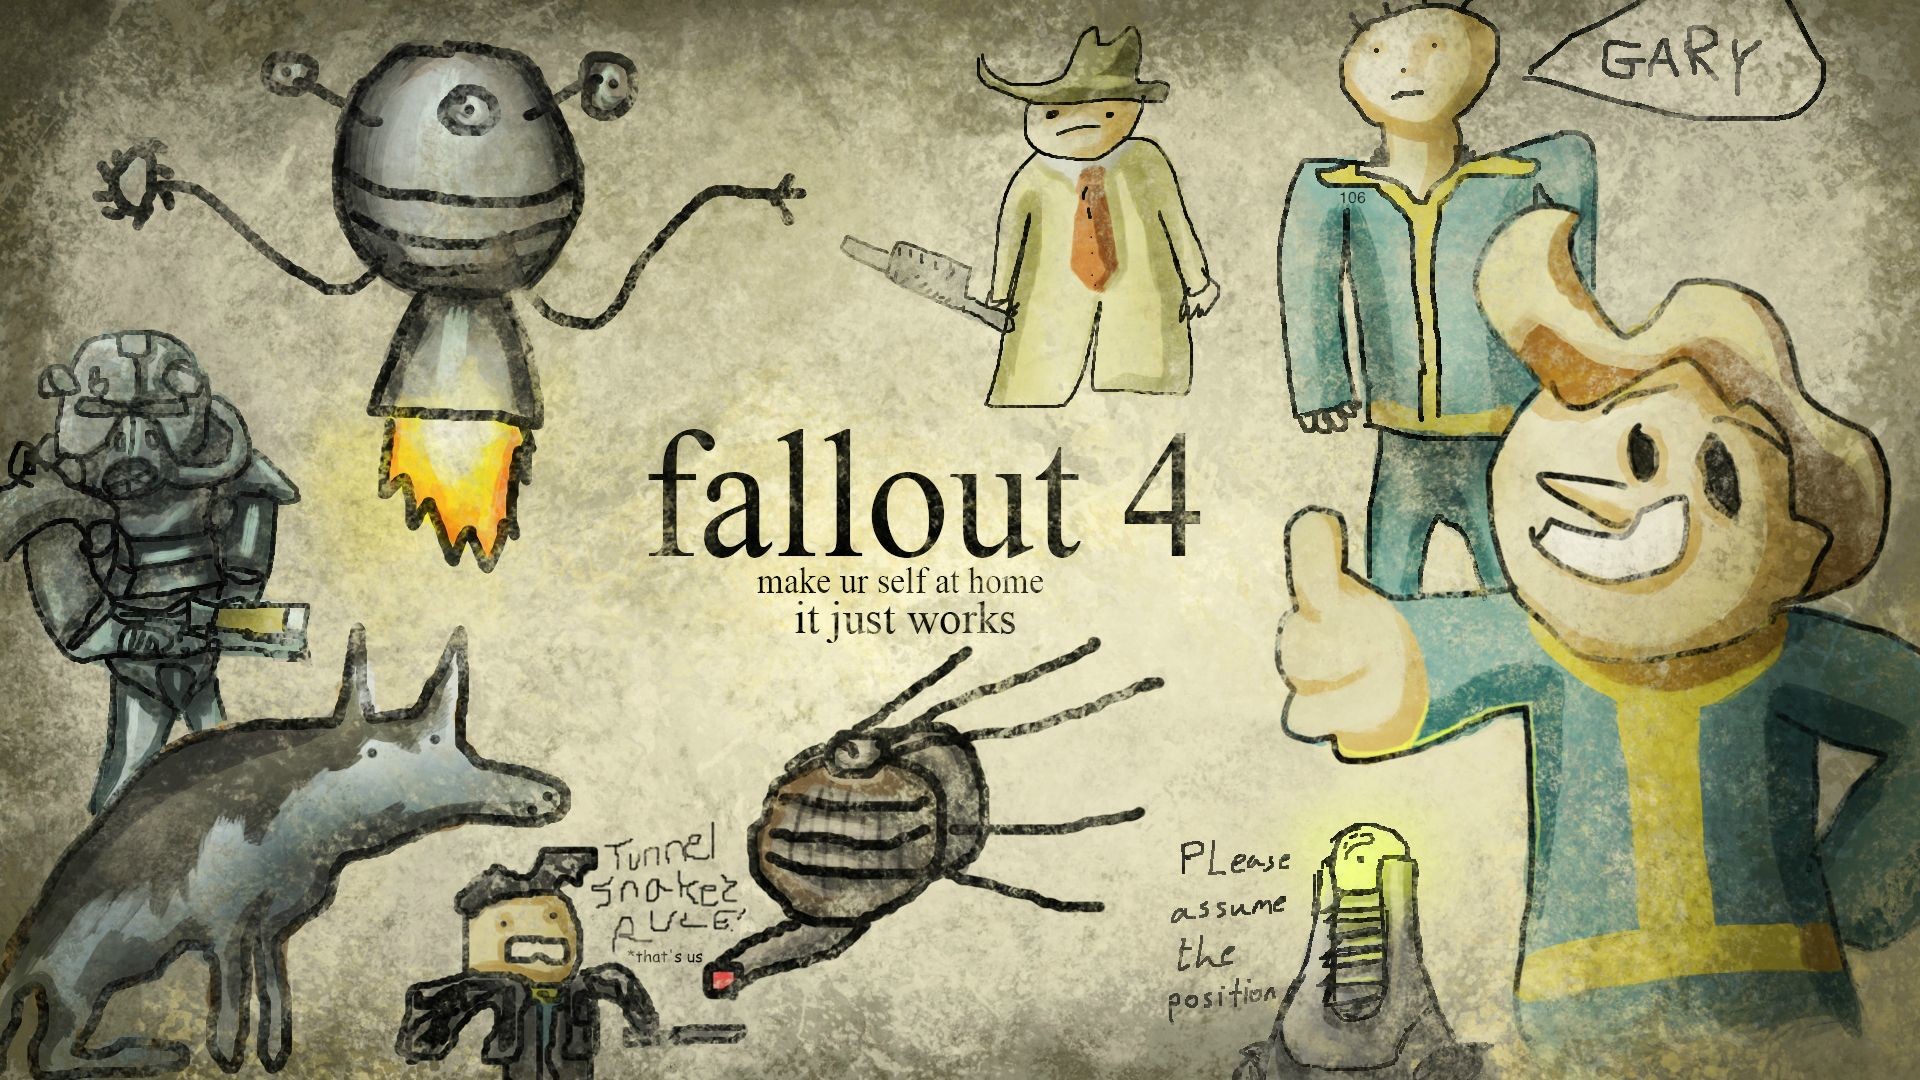 Fallout 4 Image For Desktop Wallpaper 1920 x 1080 px 623.08 KB pipboy please standby